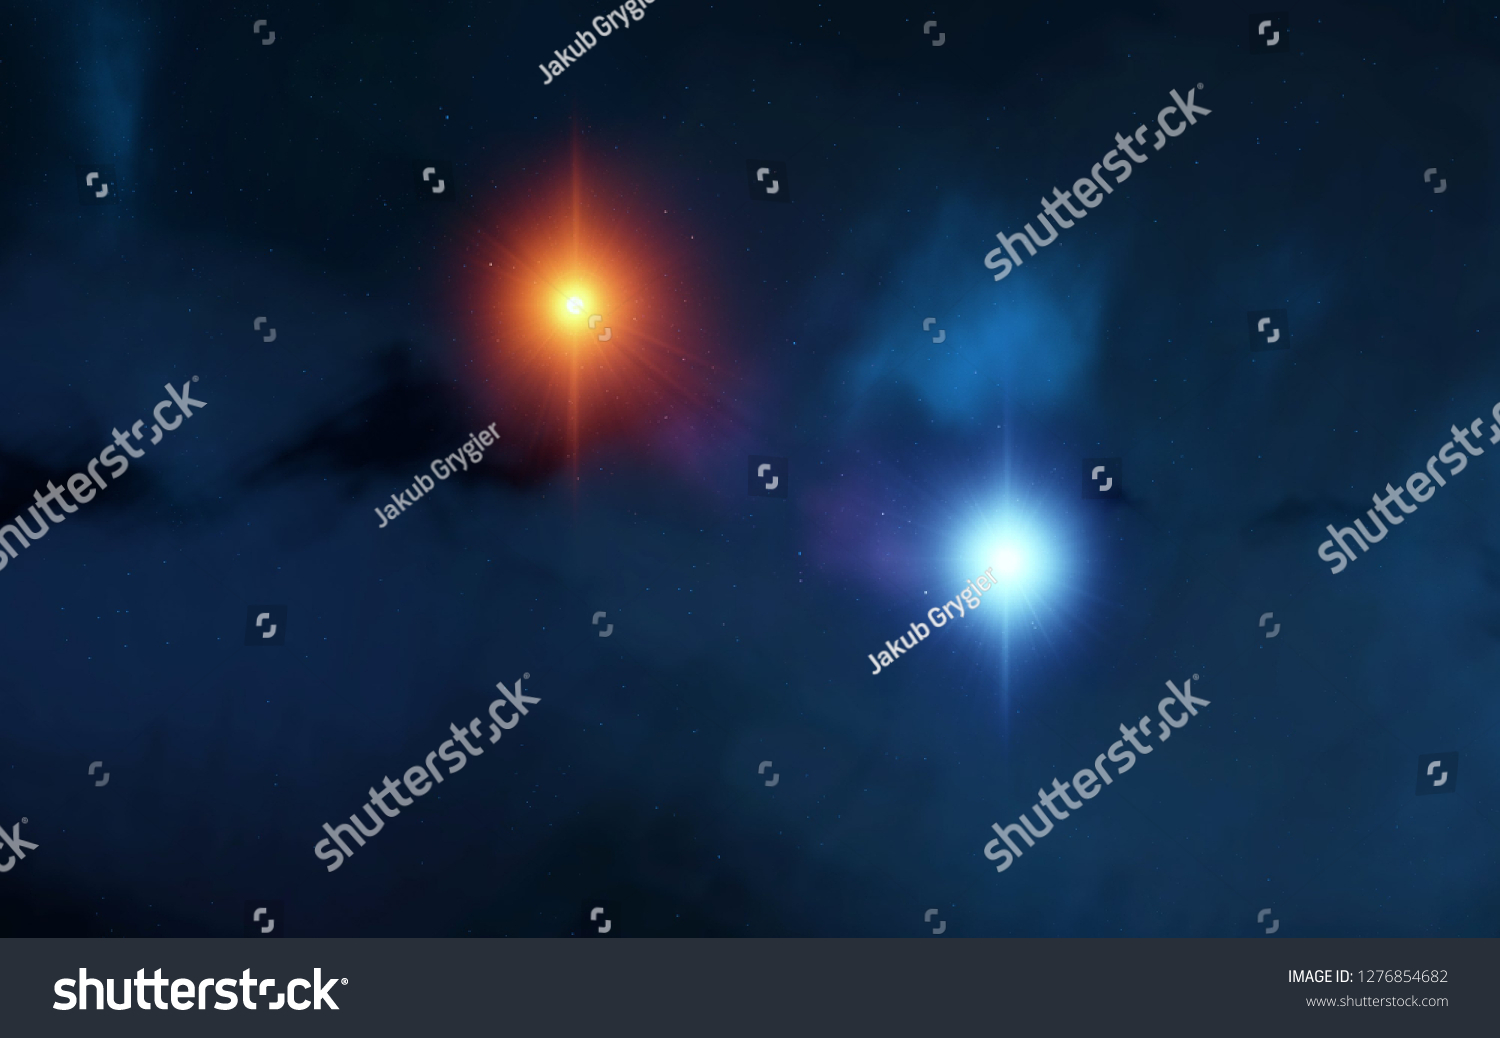 2d illustration. Deep vast space. Bright stars, planets, moons. Various science fiction creative backdrops. Space art. Alien solar systems. Distant space. Realistic background deep cosmos. #1276854682